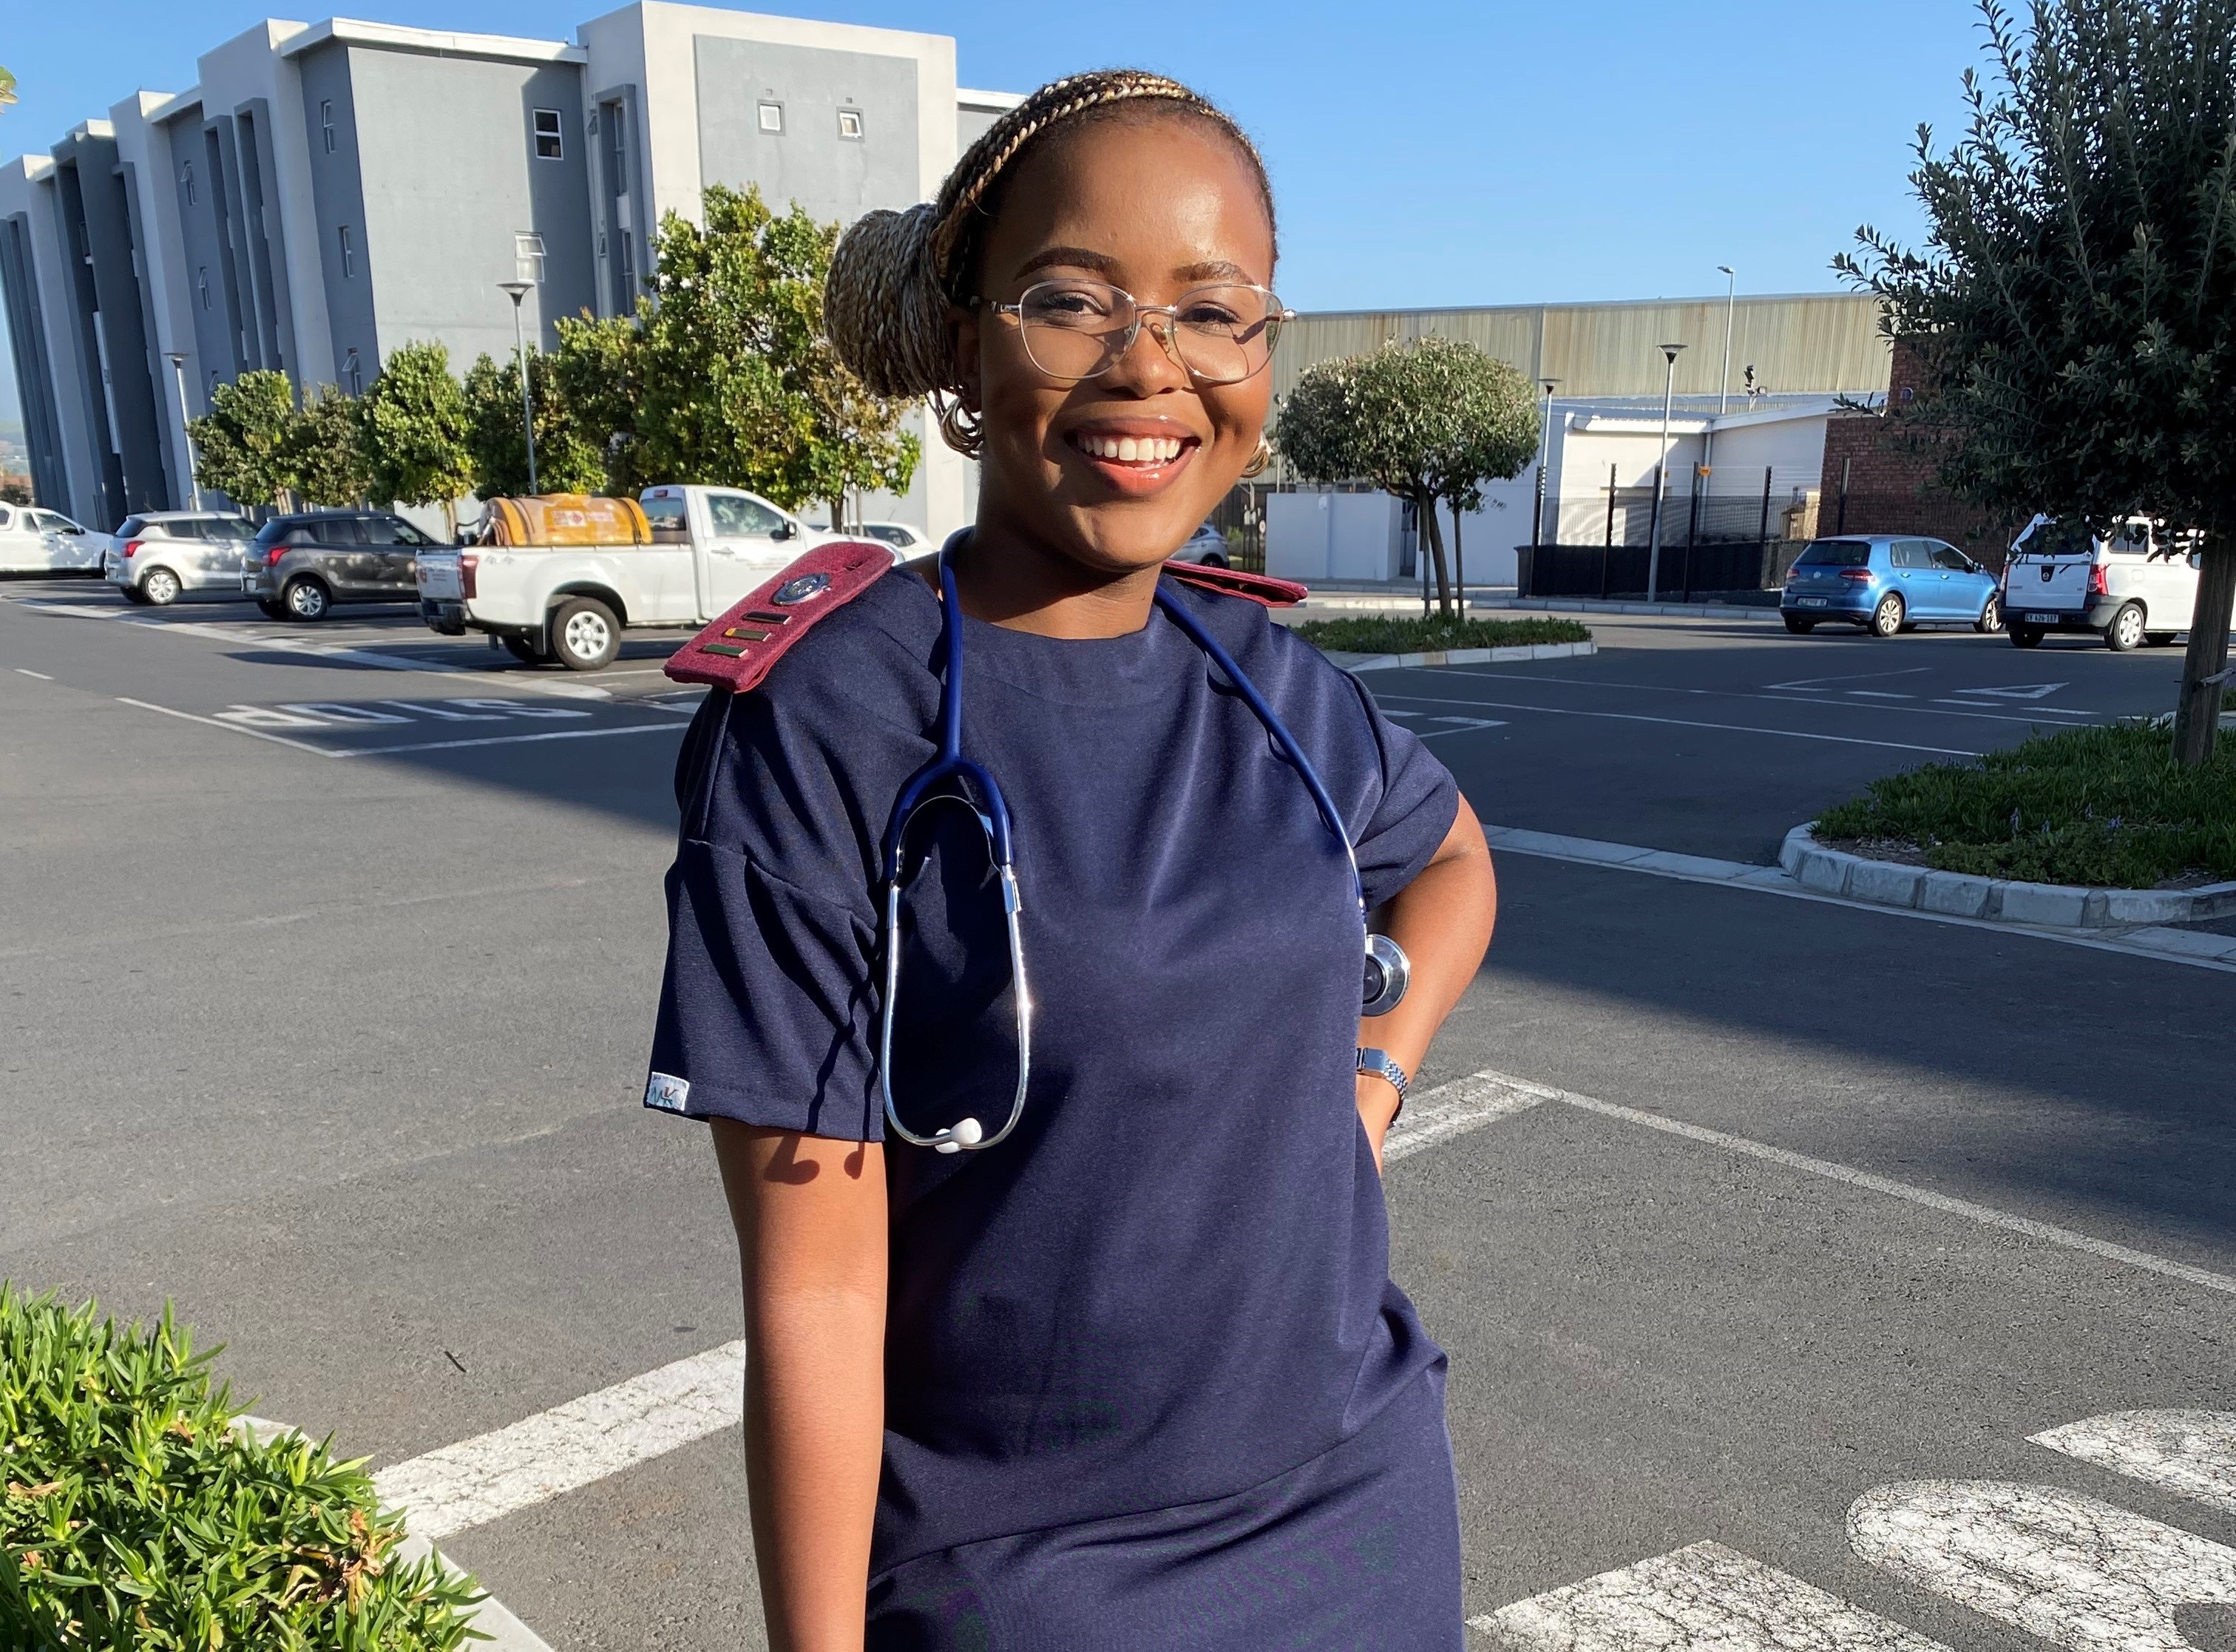 Delft CHC school health nurse Sr Mpumelelo Makhubo says no girl will receive a vaccination without her parents consent. All parents are encouraged to return consent forms to schools.